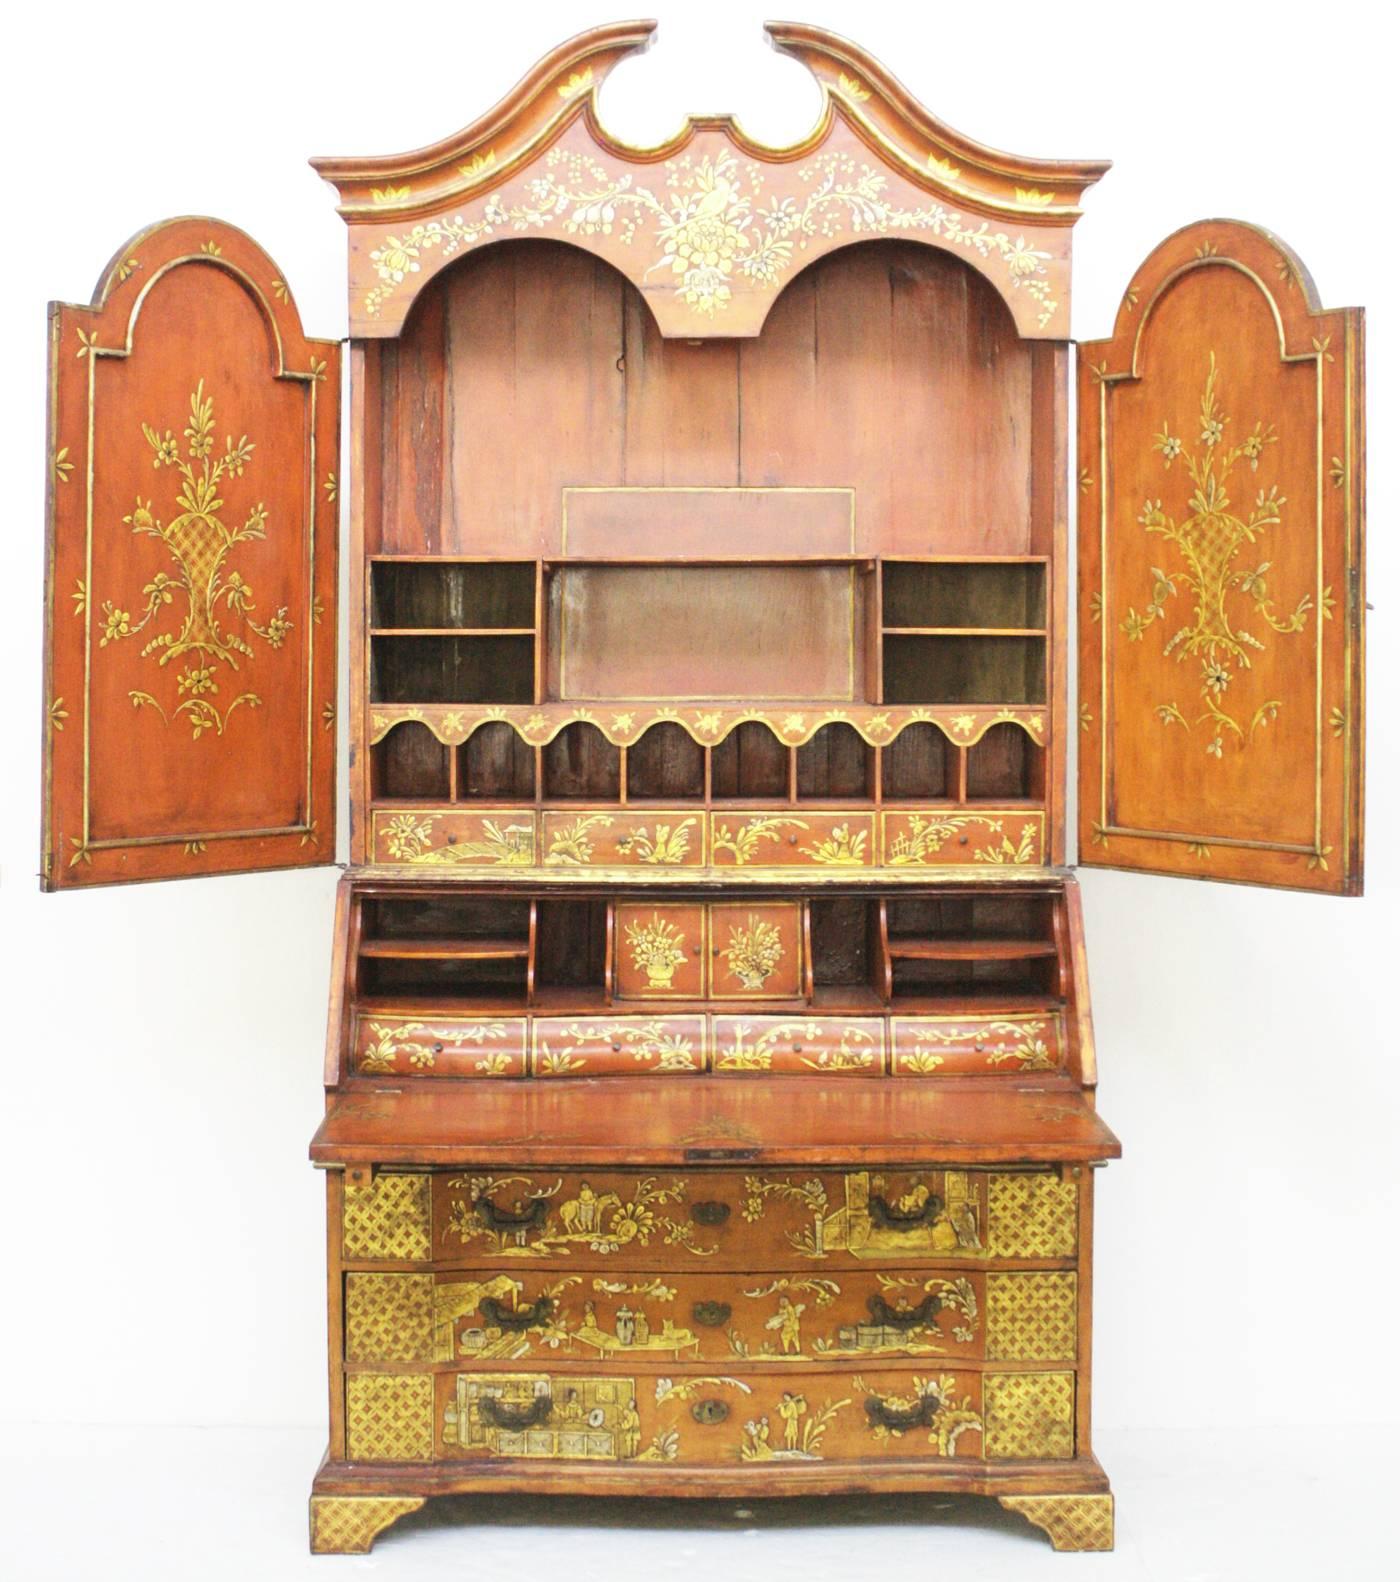 An exquisite orange / red (or red / orange) with gilt chinoiserie pattern design secretary, two doors at top with fitted interior, centre desk portion opens to show cubby holes and shelves, base with four drawers, broken pediment at top

with two